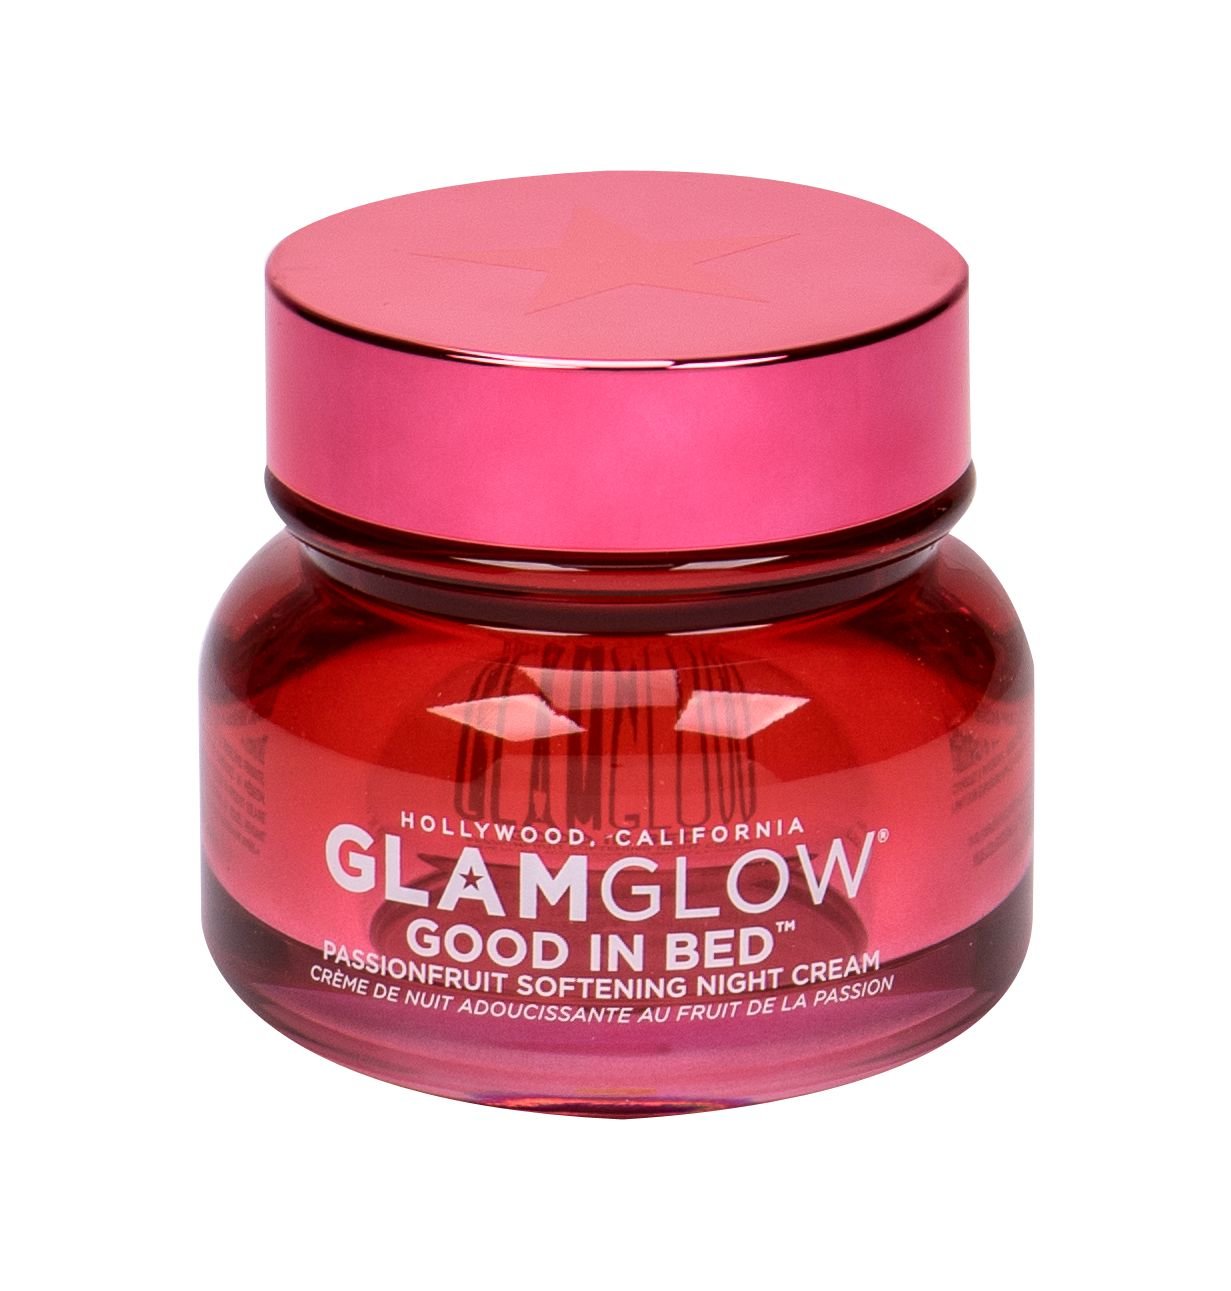 Glam Glow Good In Bed